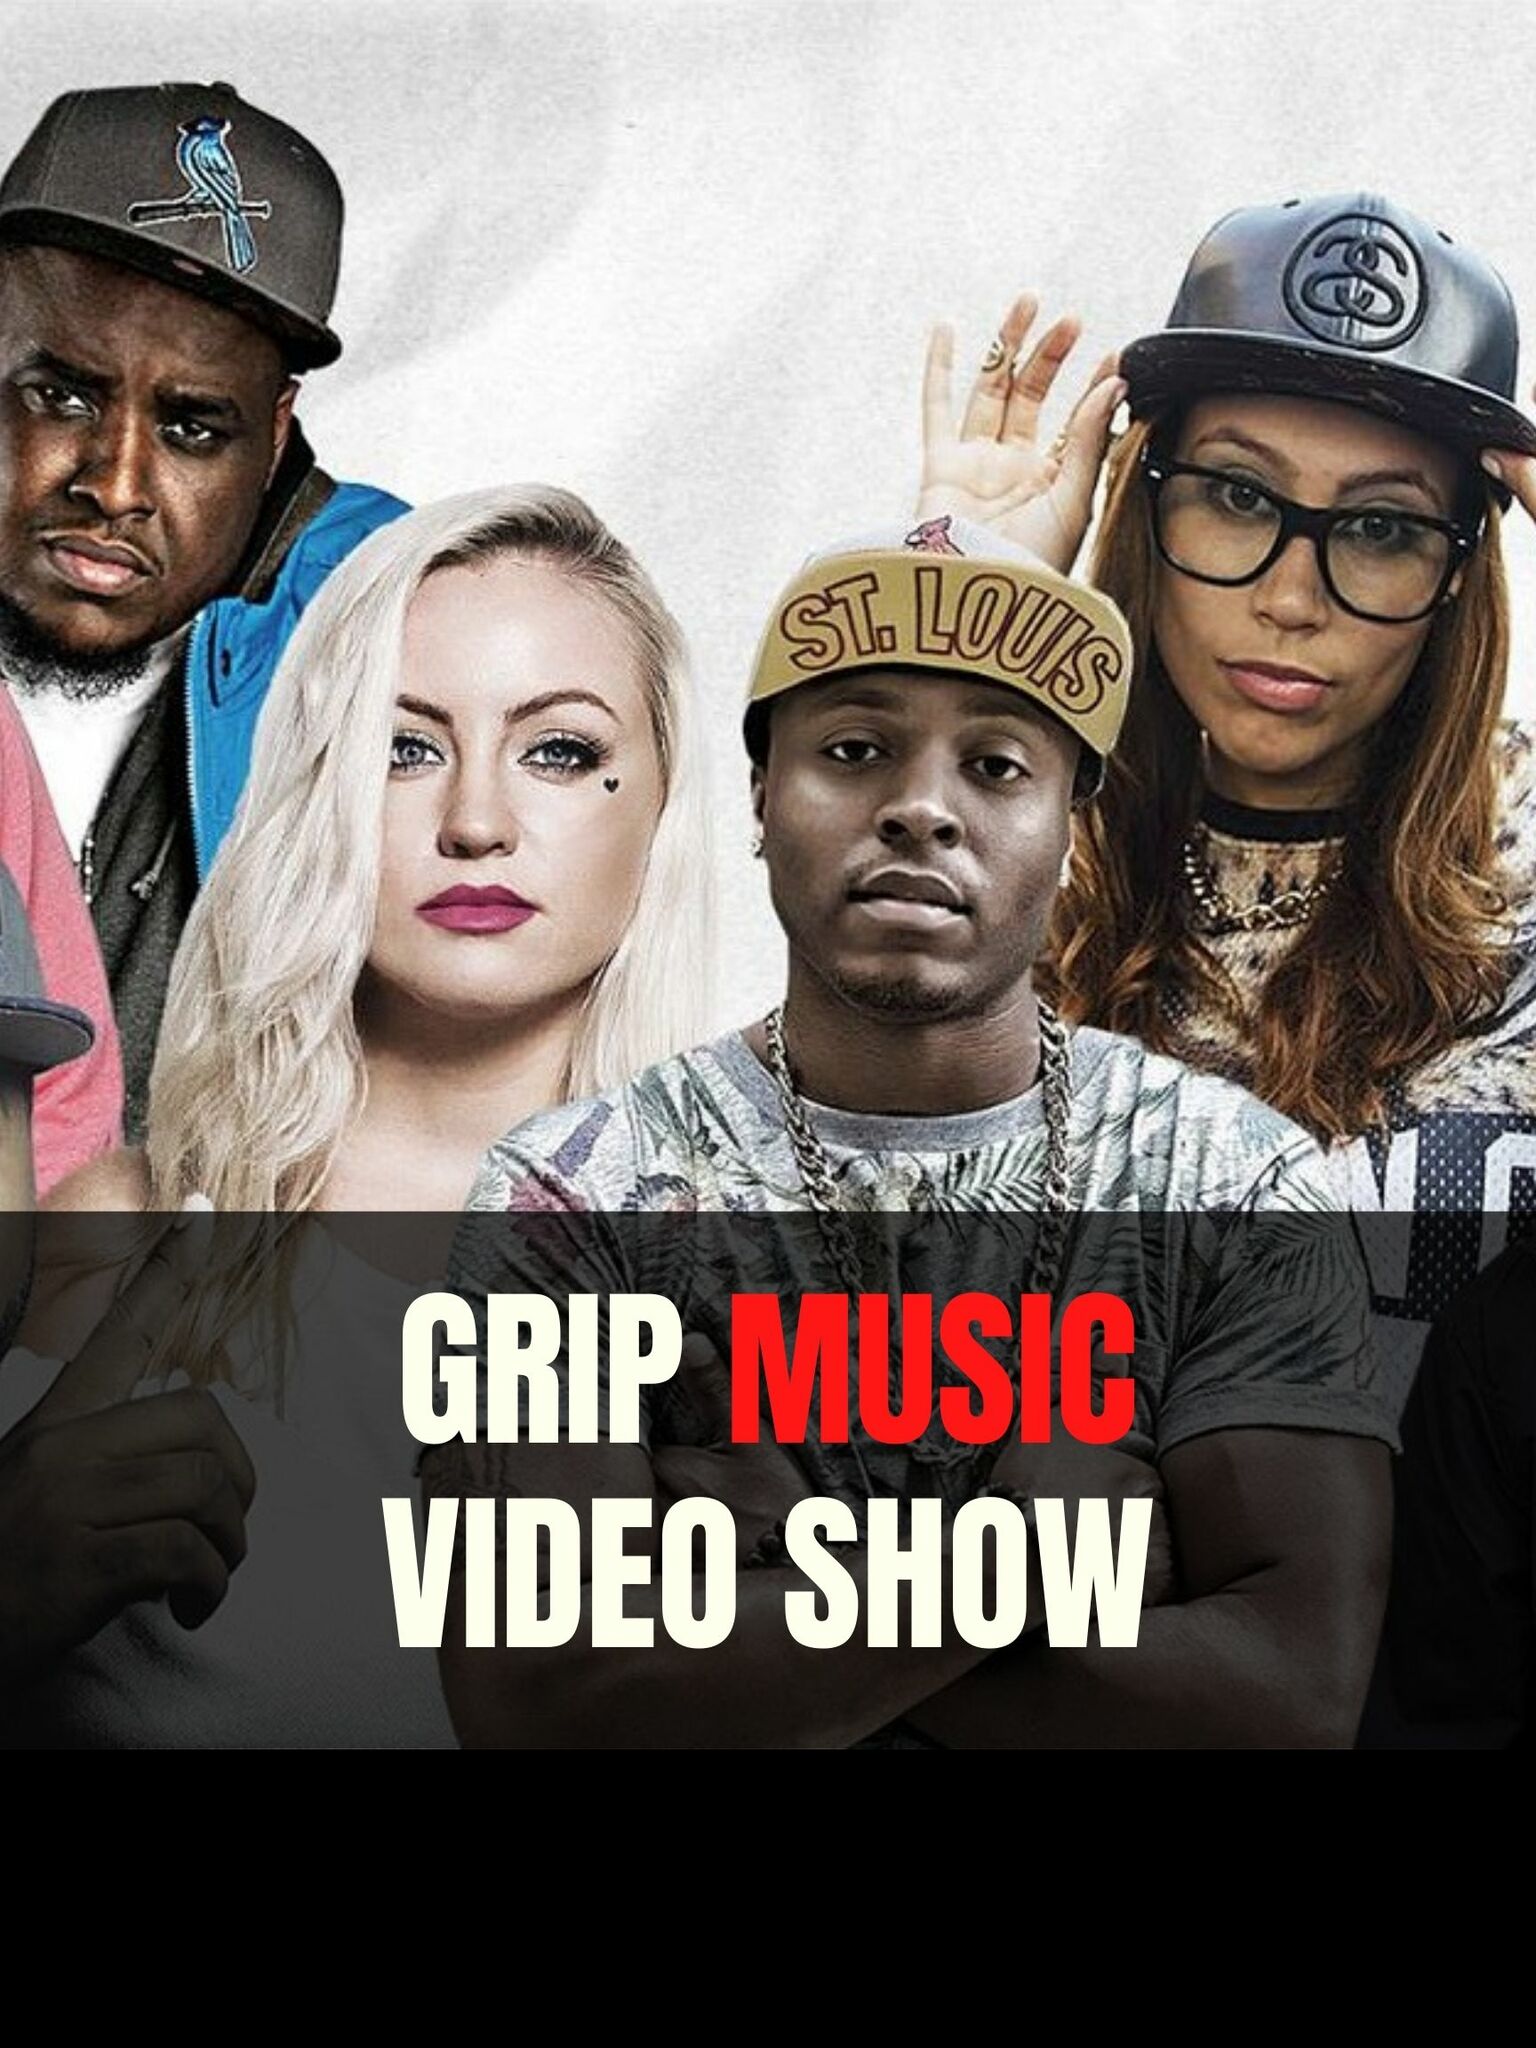 The Grip Music Video Show